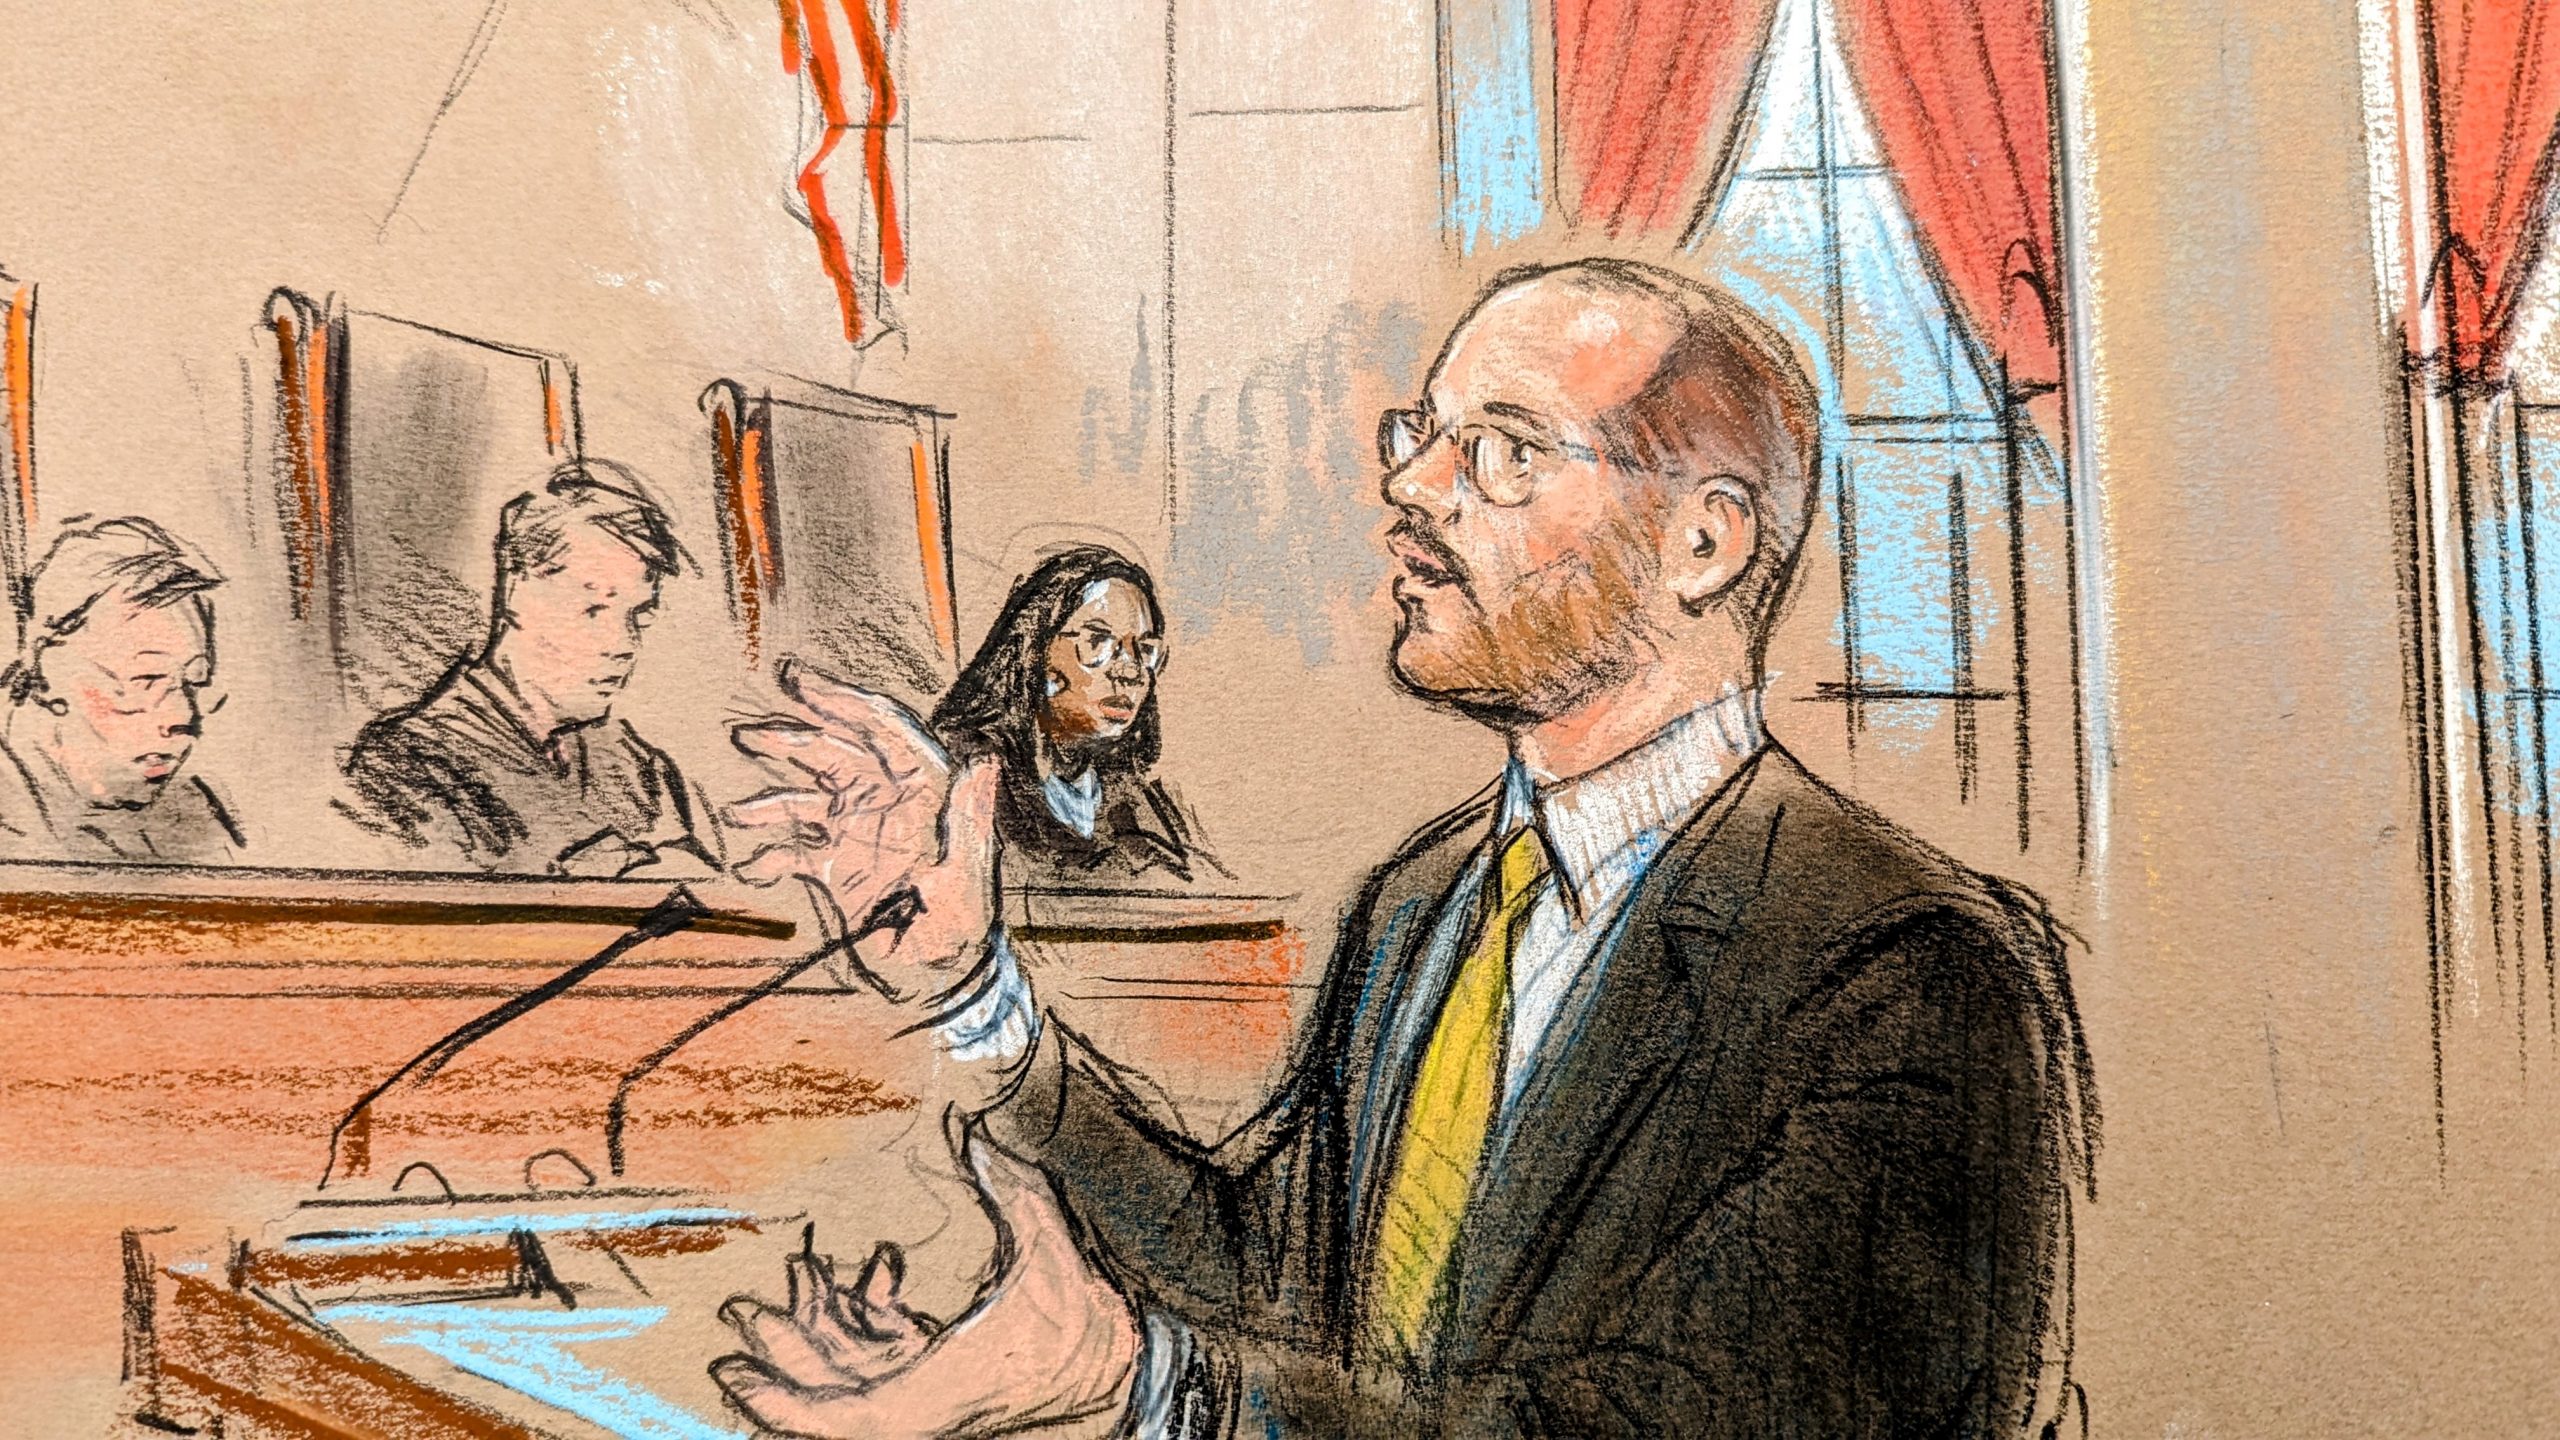 Close-up sketch of man in spectacles gesturing before the podium.